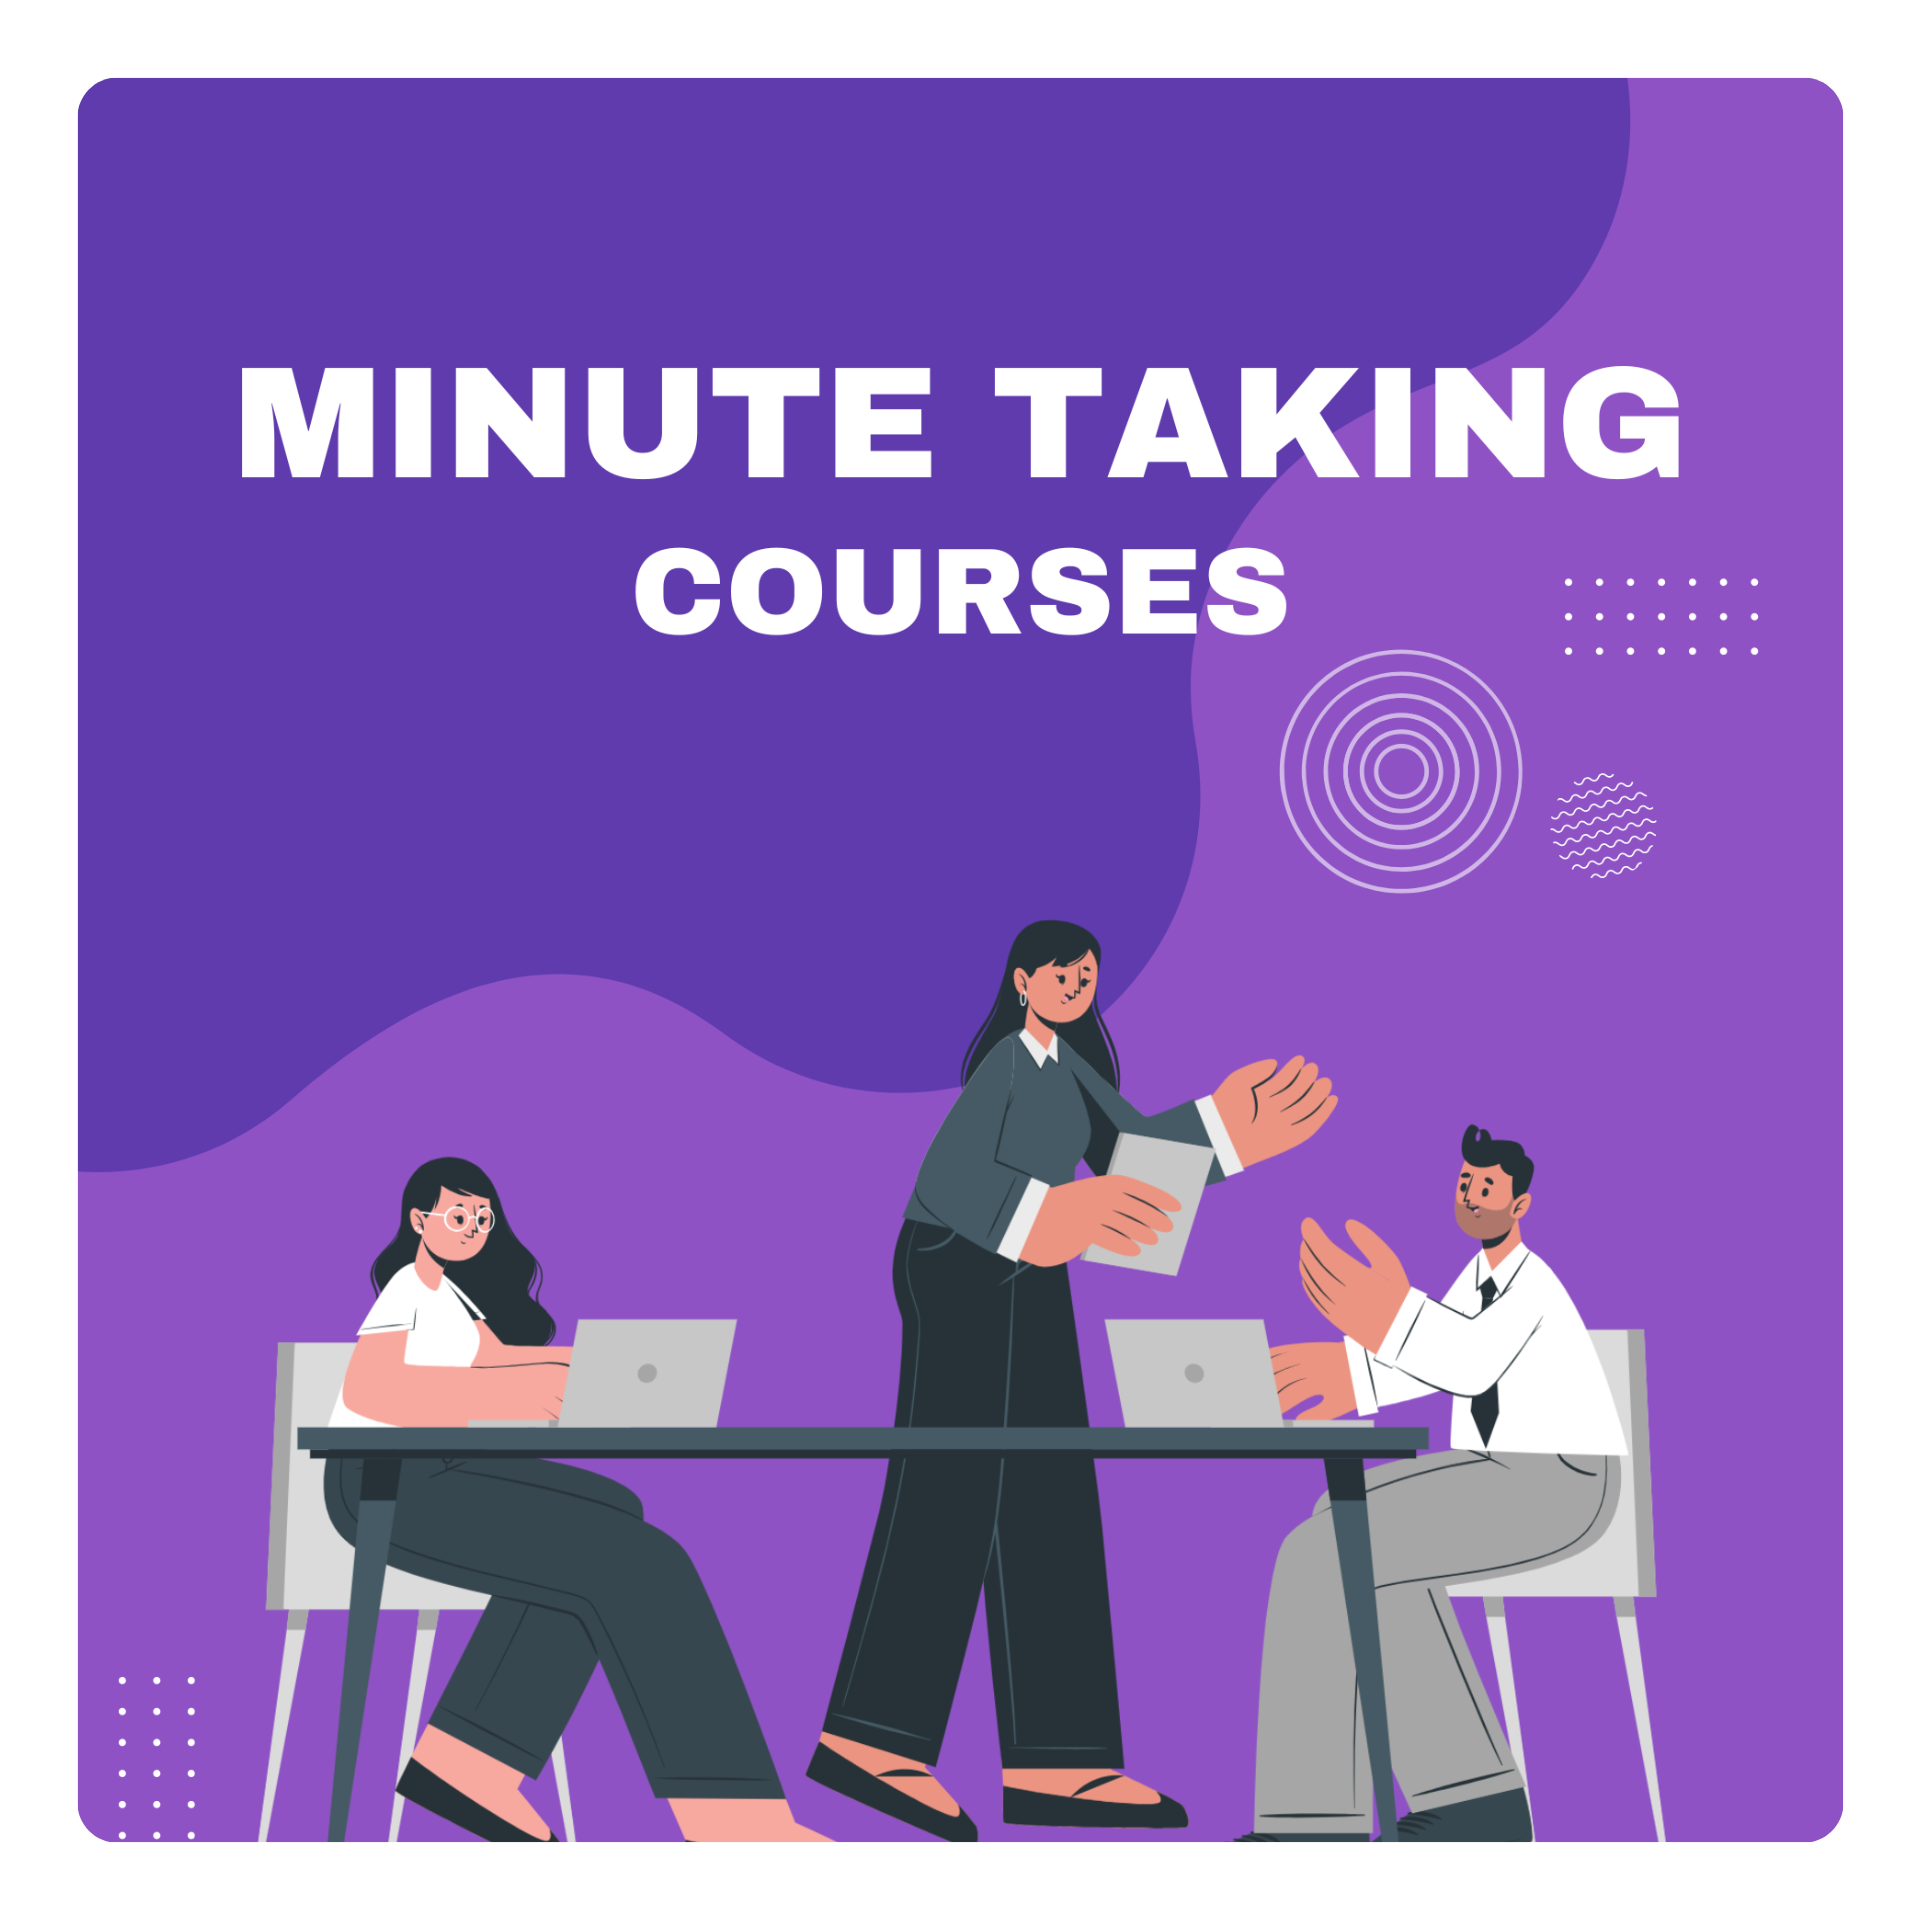 Minute taking courses